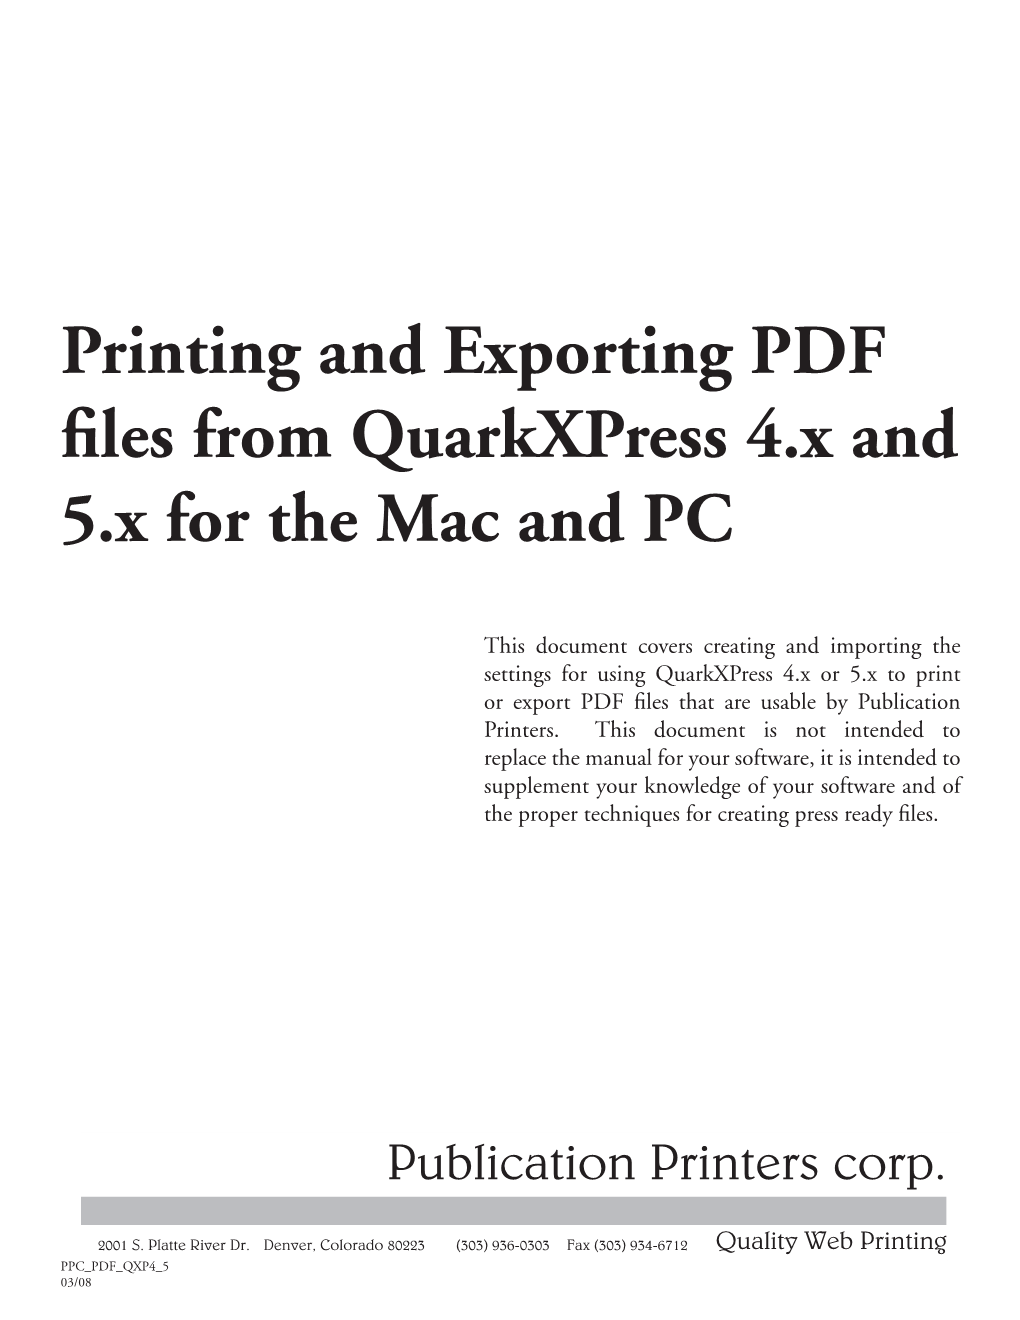 Printing and Exporting PDF Files from Quarkxpress 4.X and 5.X for the Mac and PC